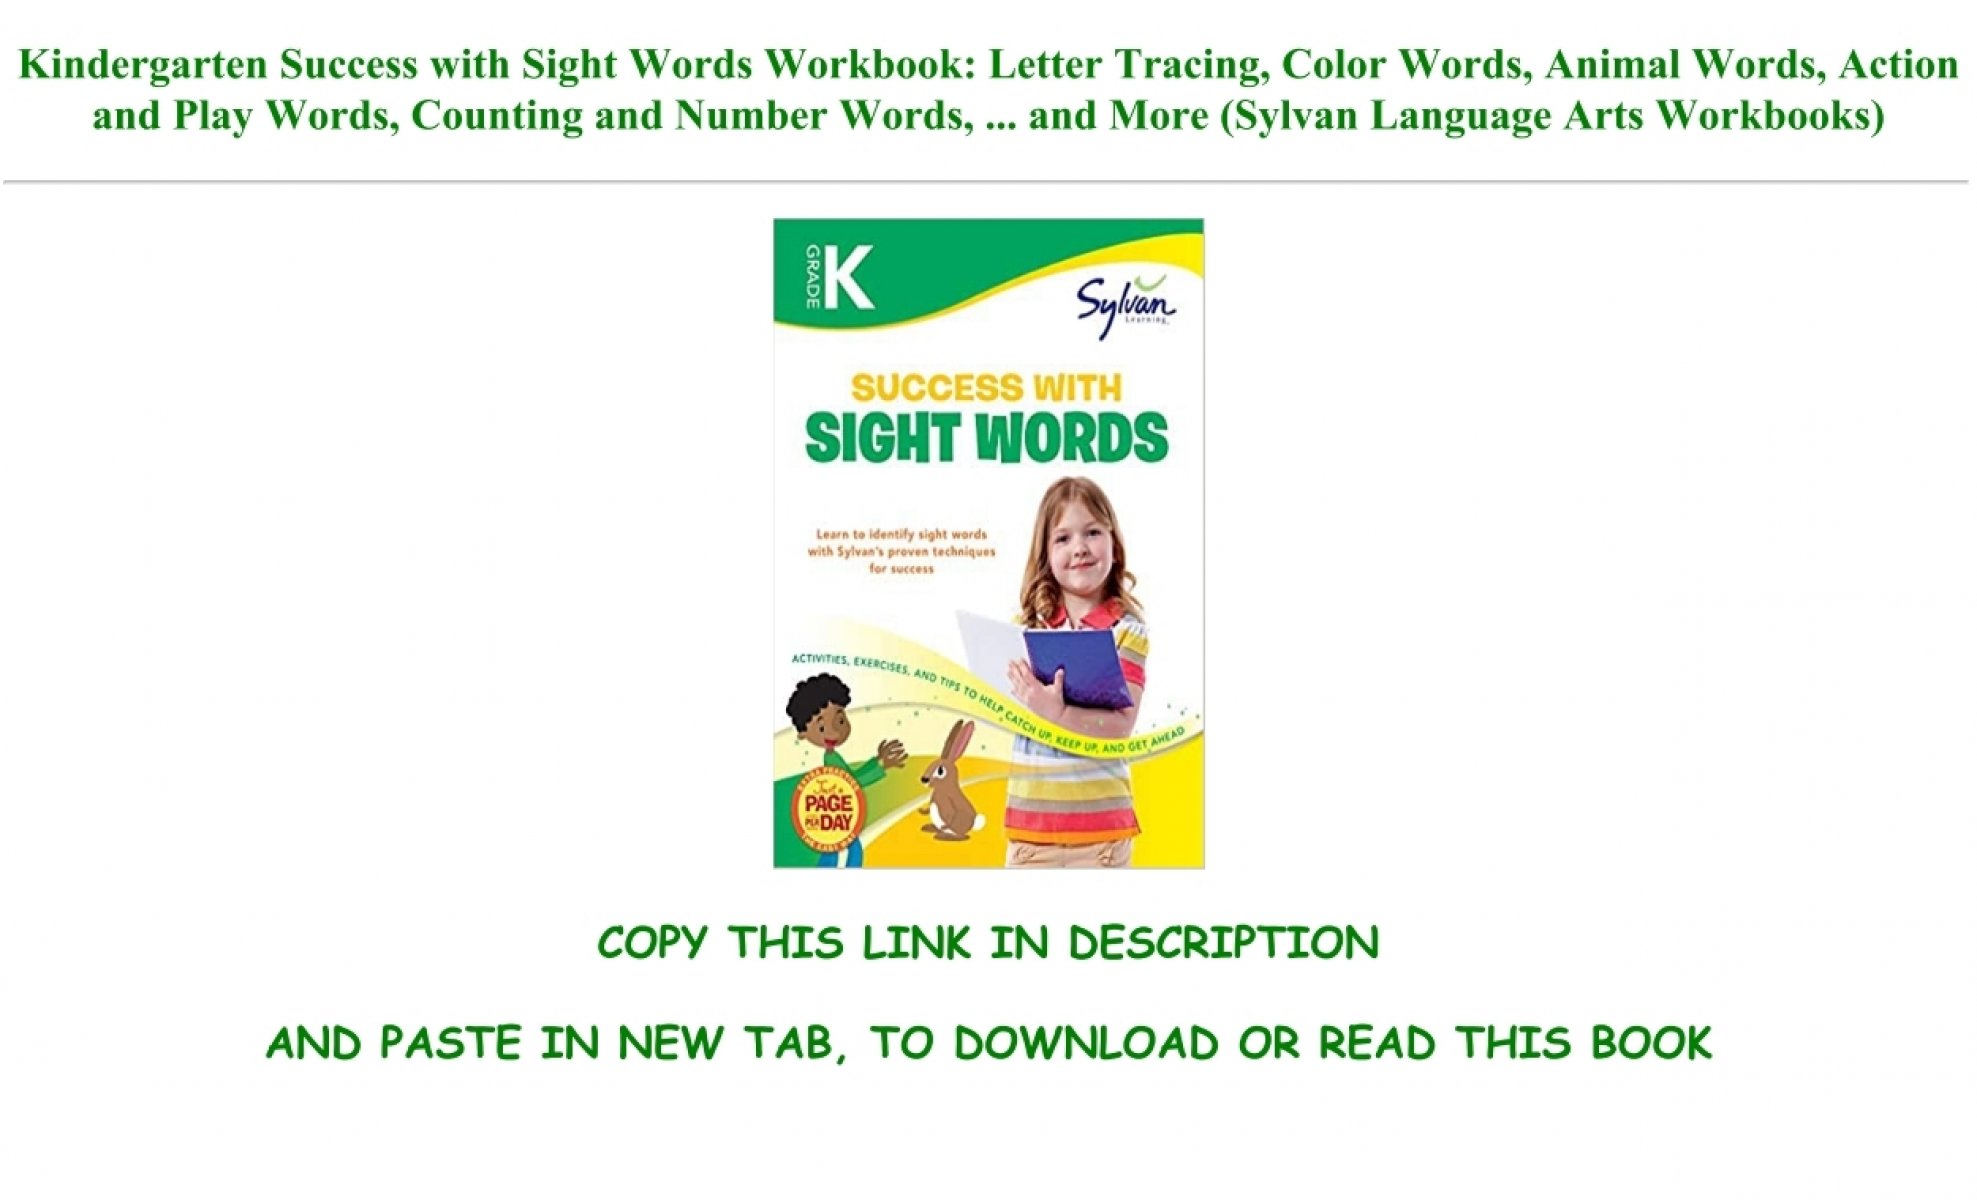 pdf-kindergarten-success-with-sight-words-workbook-letter-tracing-color-words-animal-words